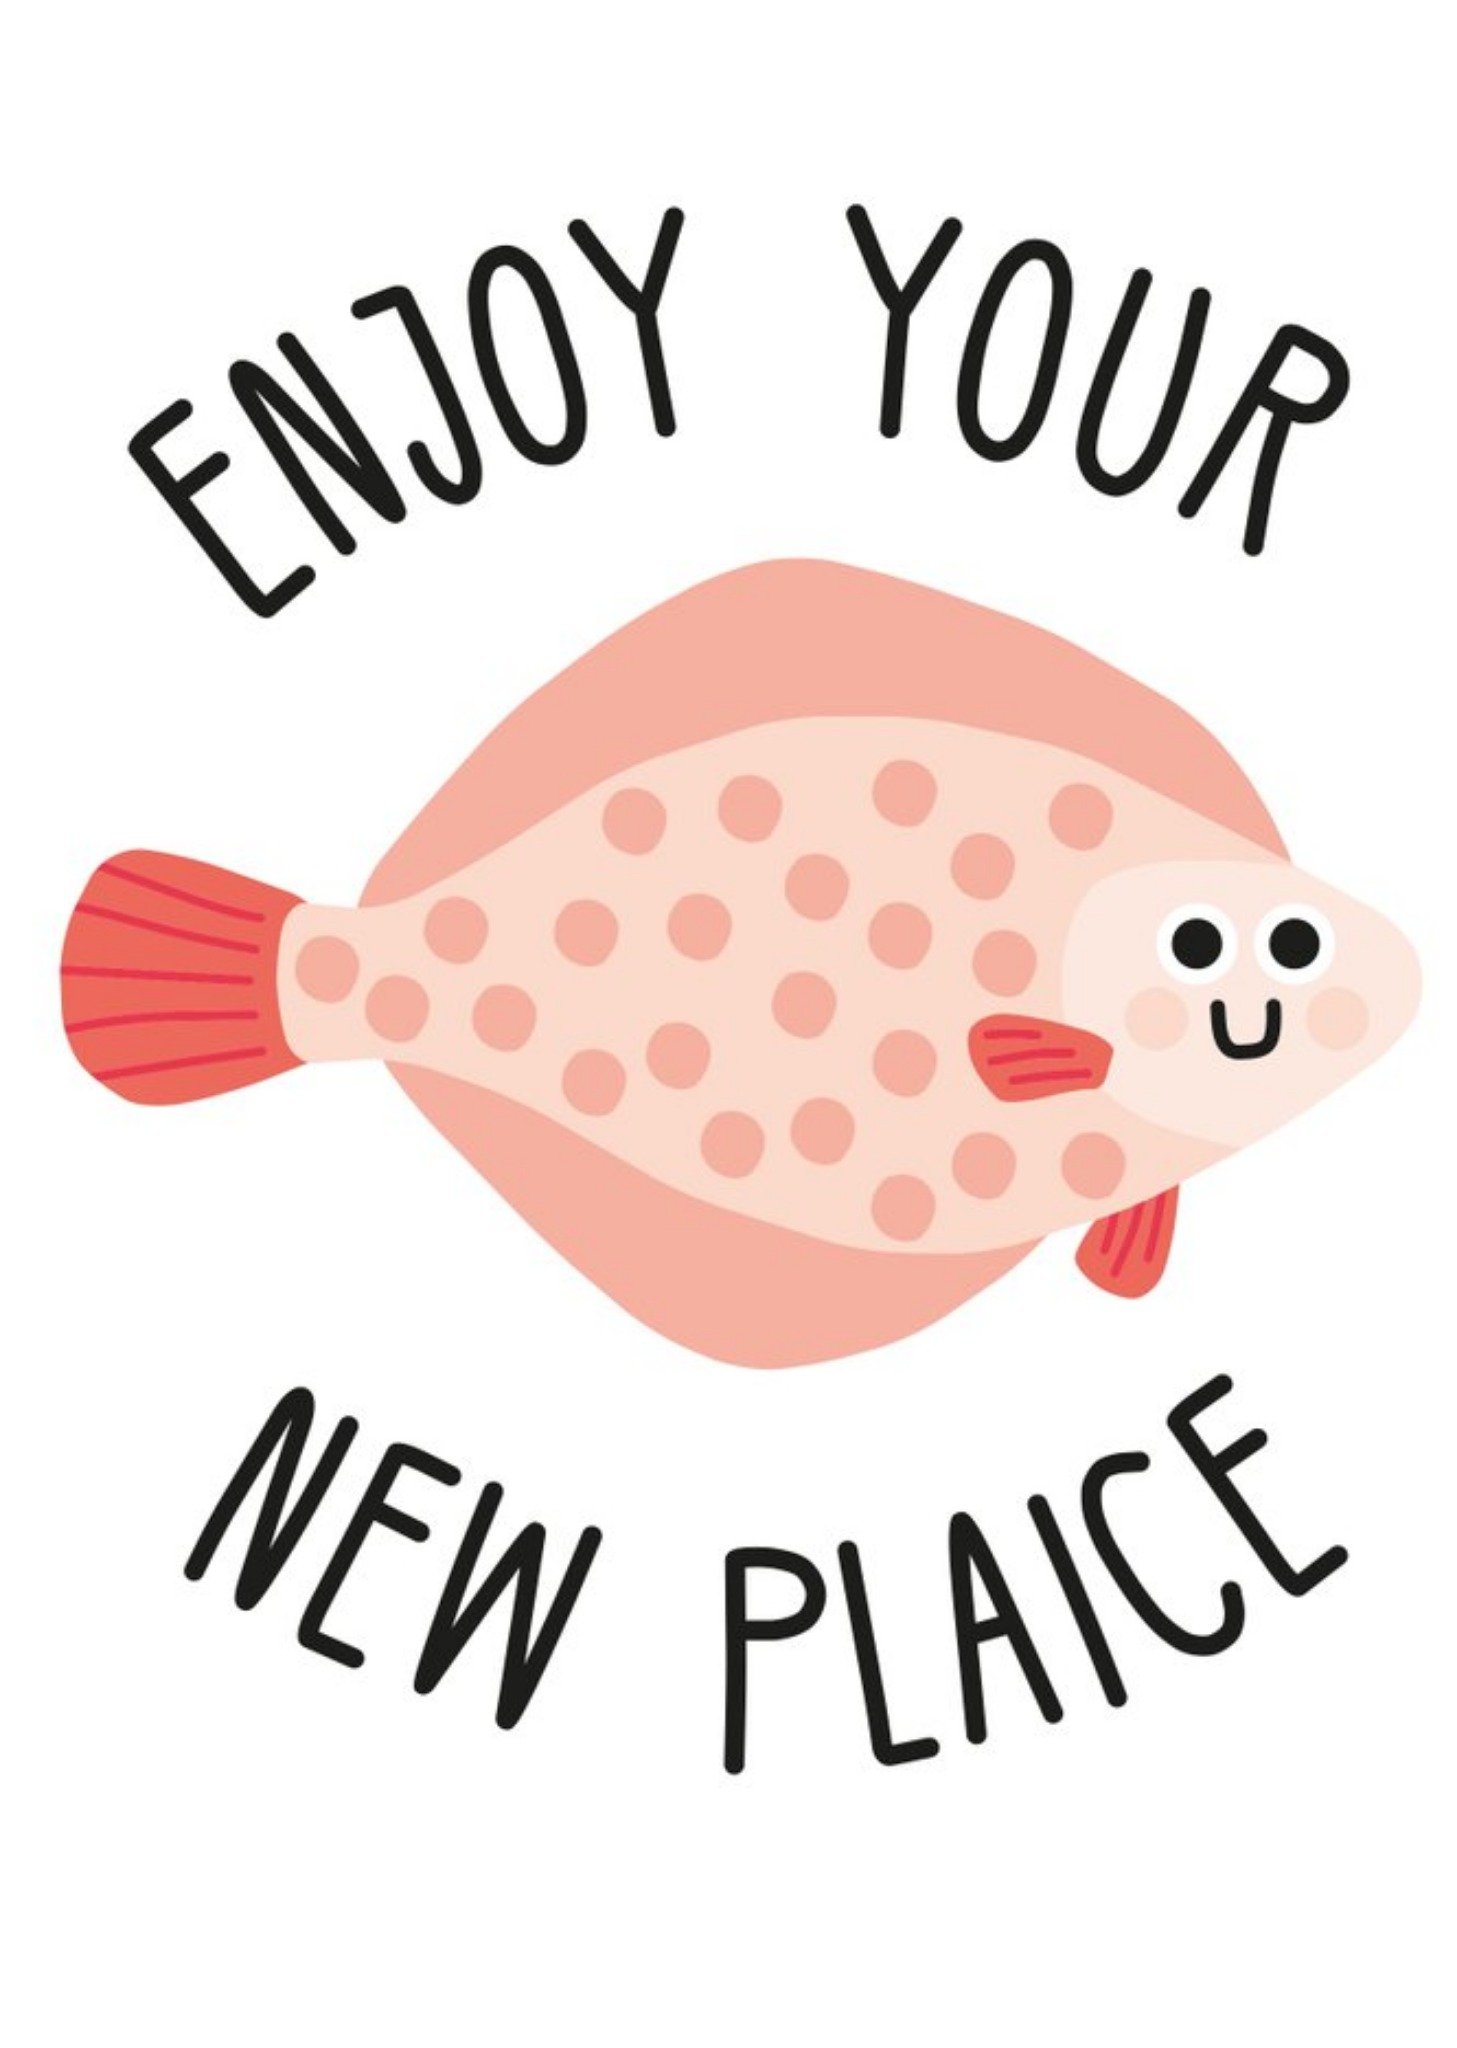 Moonpig Illustration Of A Fish Enjoy Your New Plaice Funny Pun New Home Card, Large